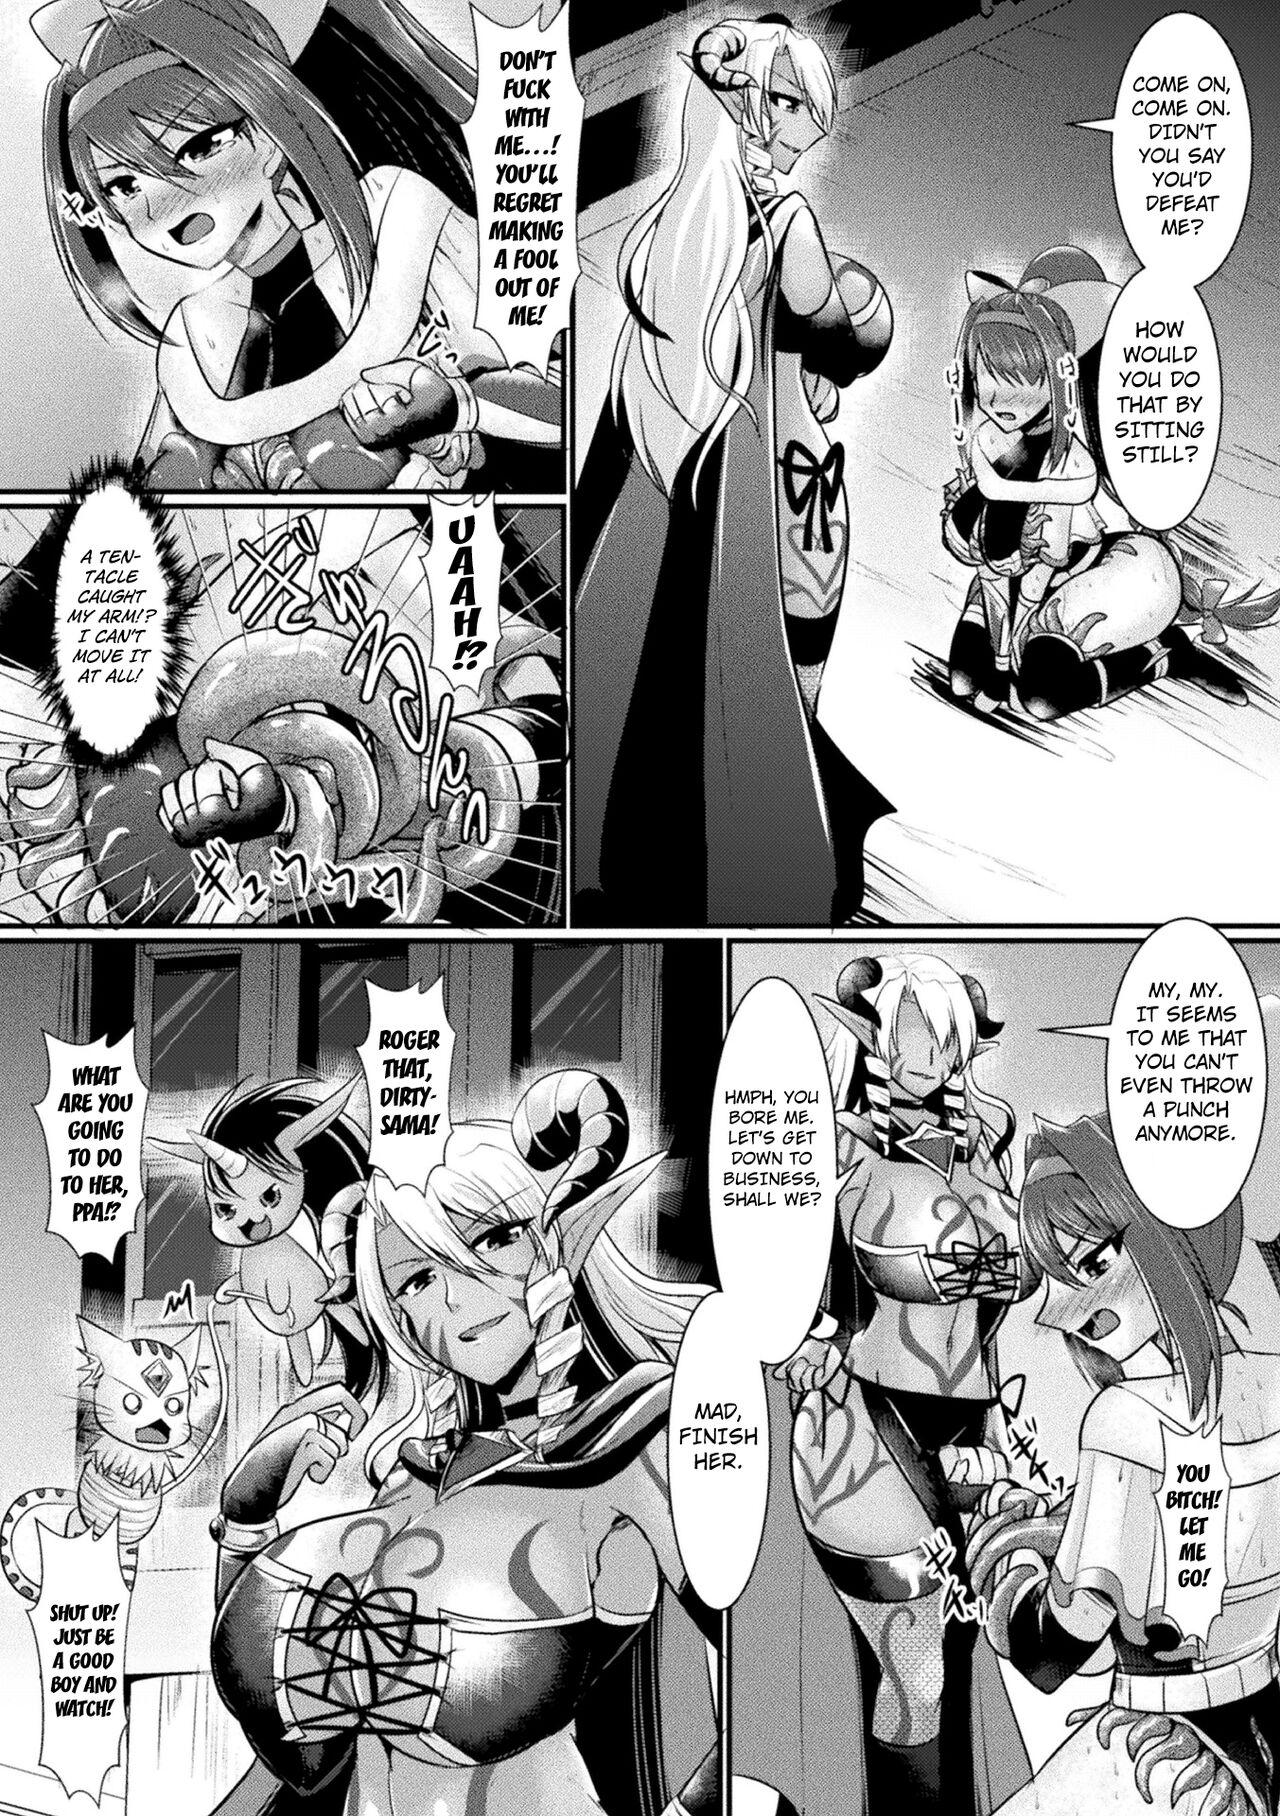 Glasses Yoru no Onna Kenshi Night Scarlet | The Fist Fighter Night Scarlet Anal Porn - Page 11